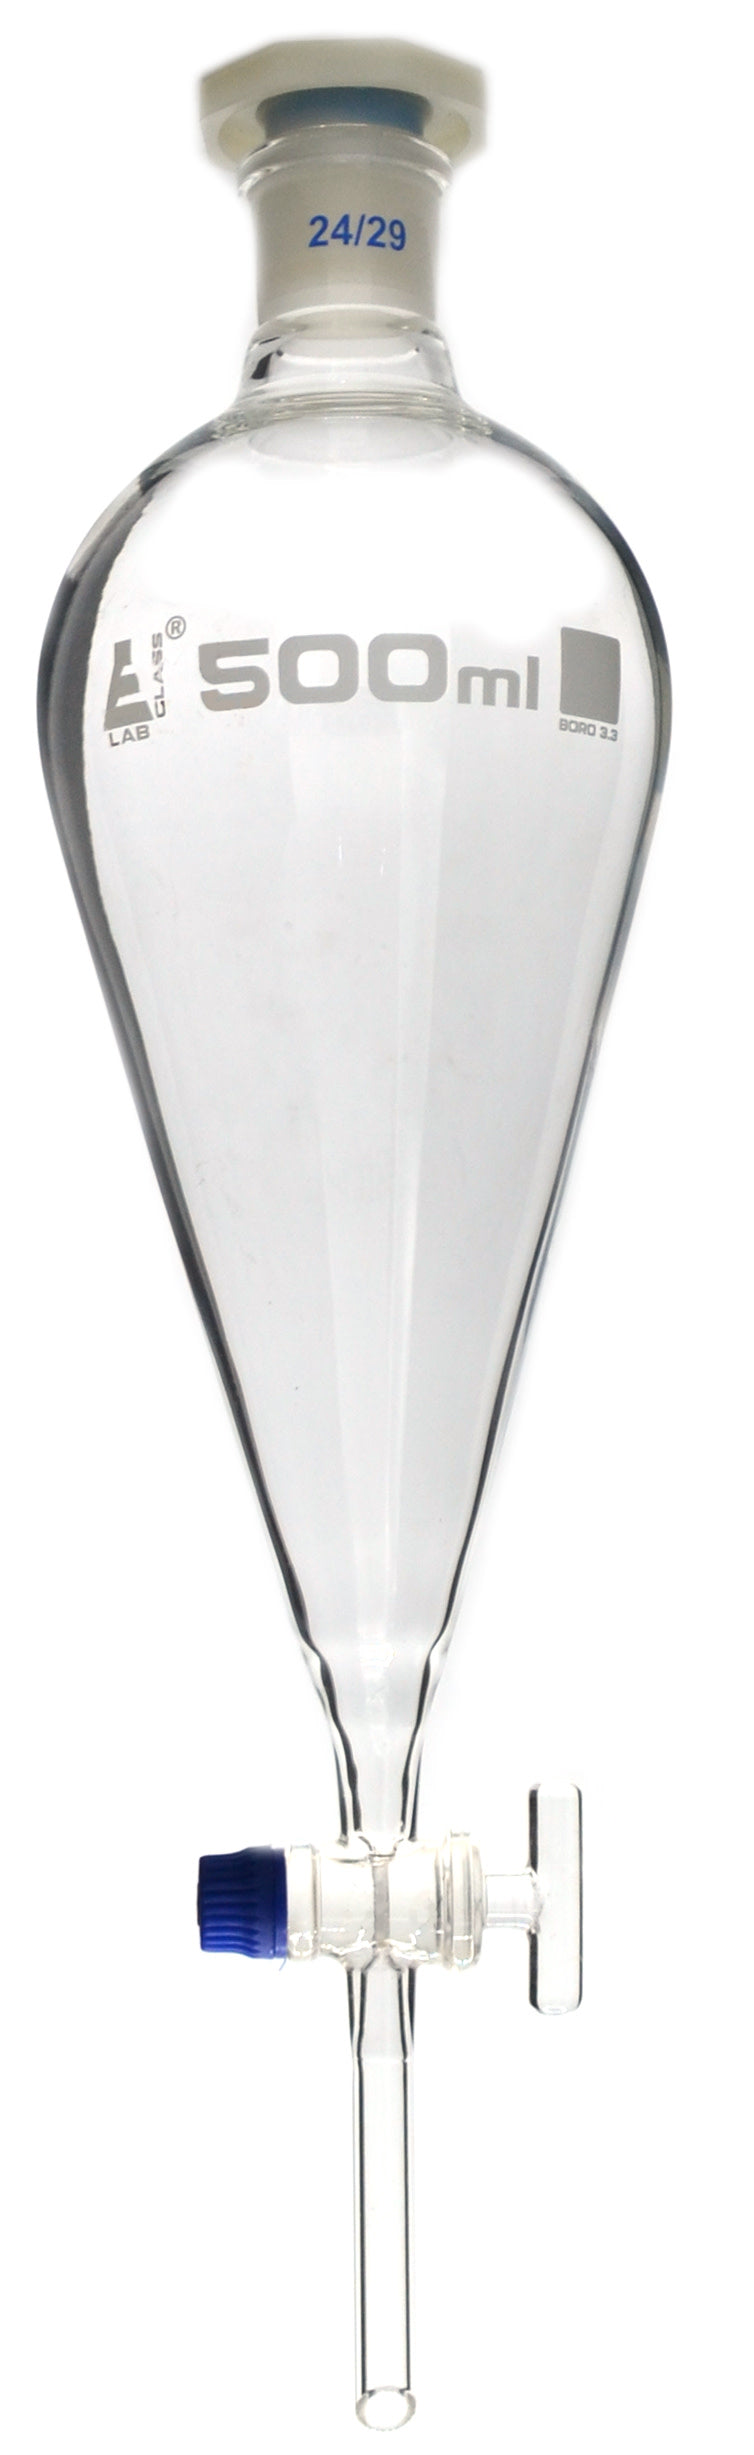 Glass Squibb Separatory Funnel with Glass Key Stopcock and Interchangeable Polypropylene Stopper, 500 ml, Autoclavable